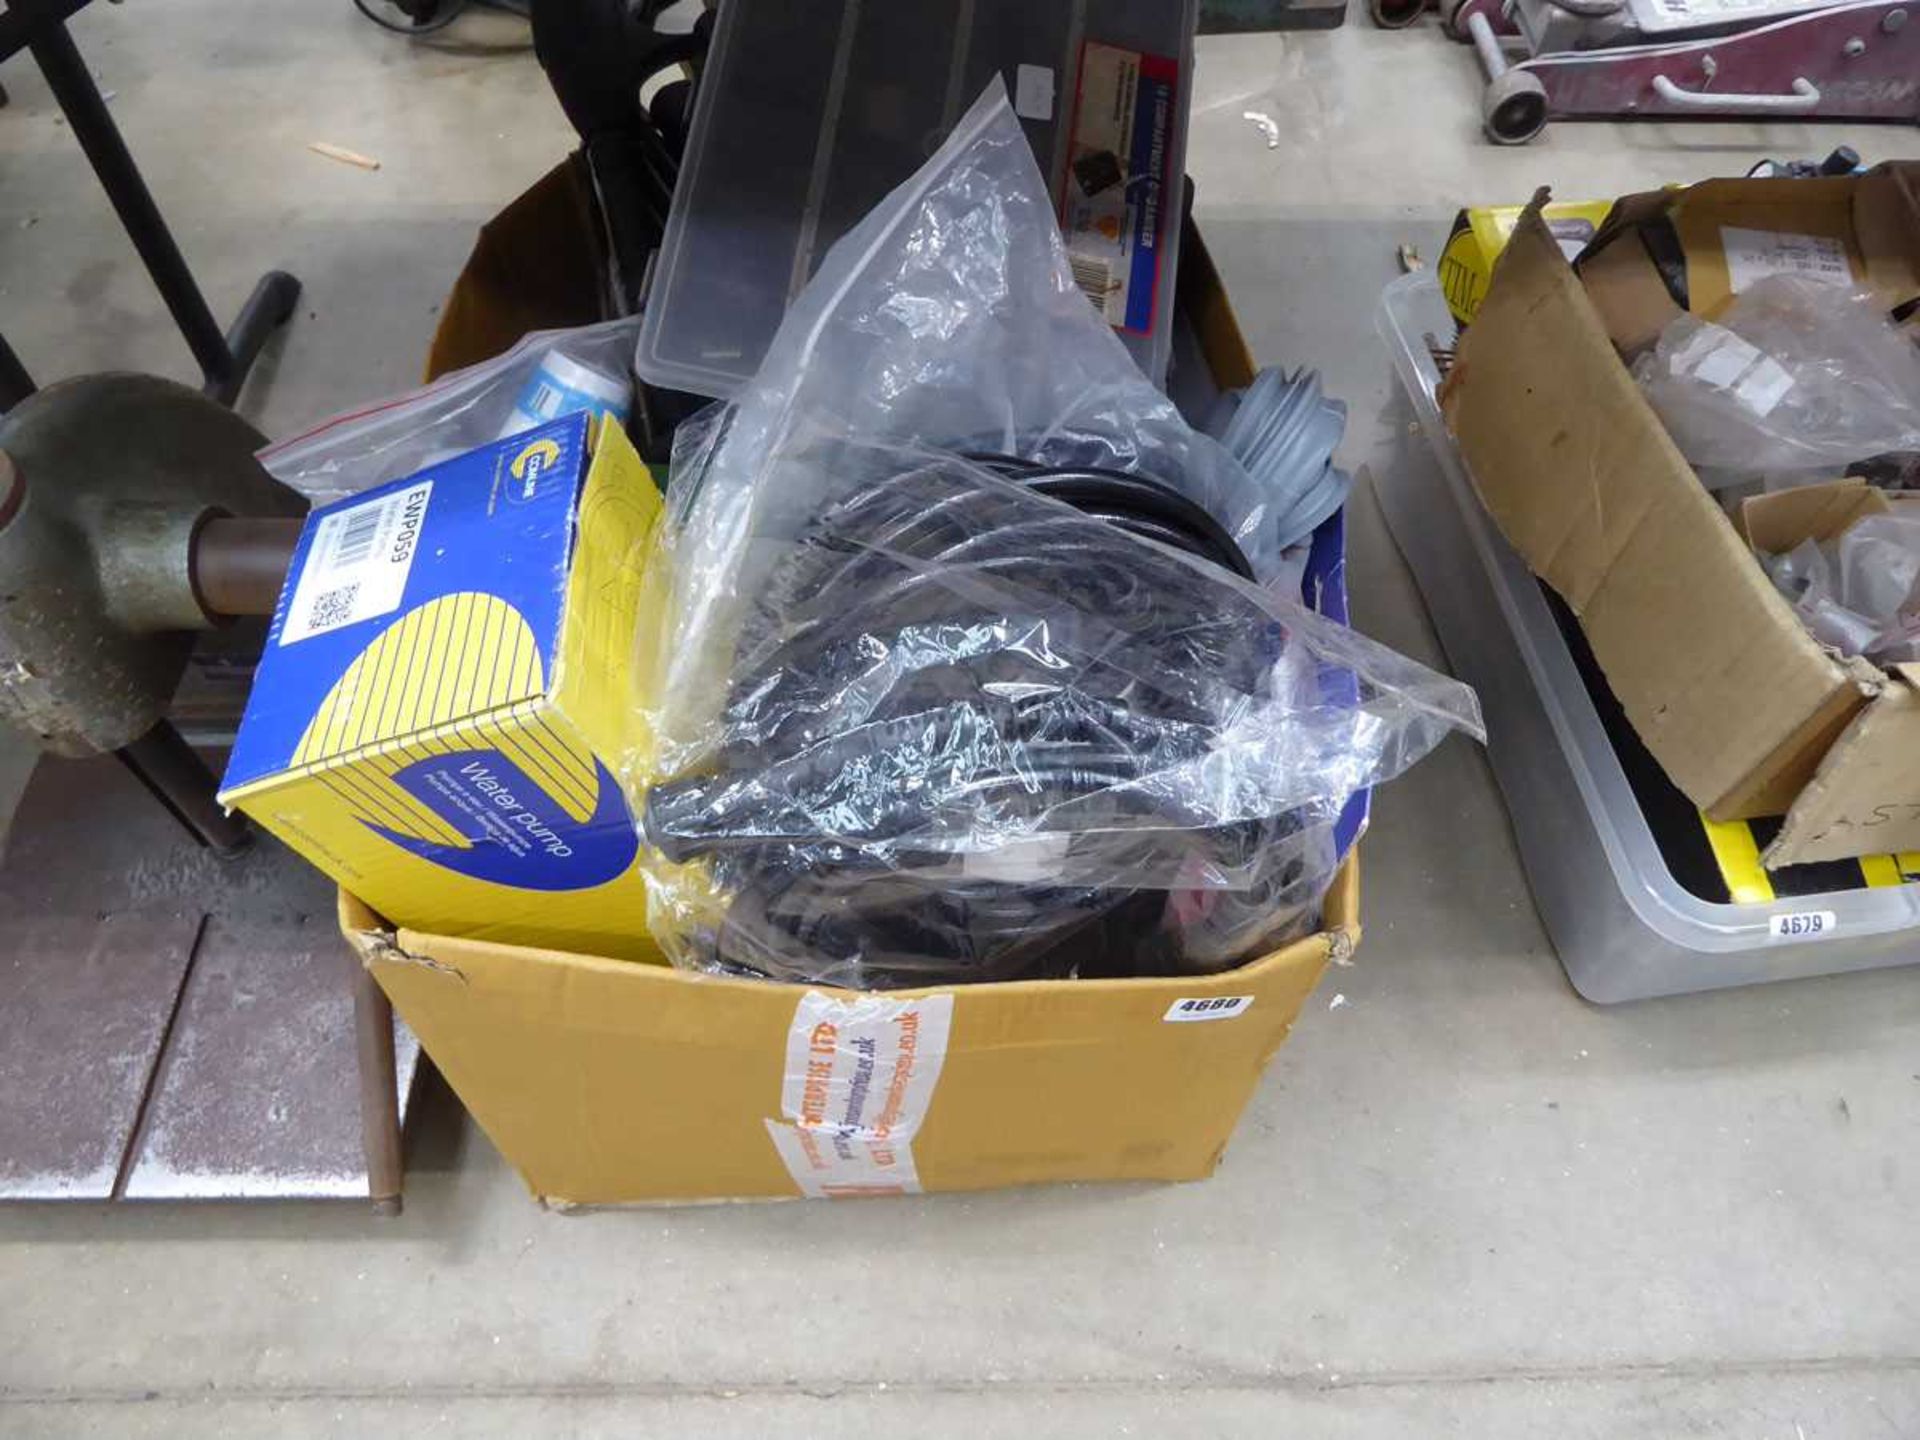 Box containing pressure washer hoses, washing machine pipes, fans etc.